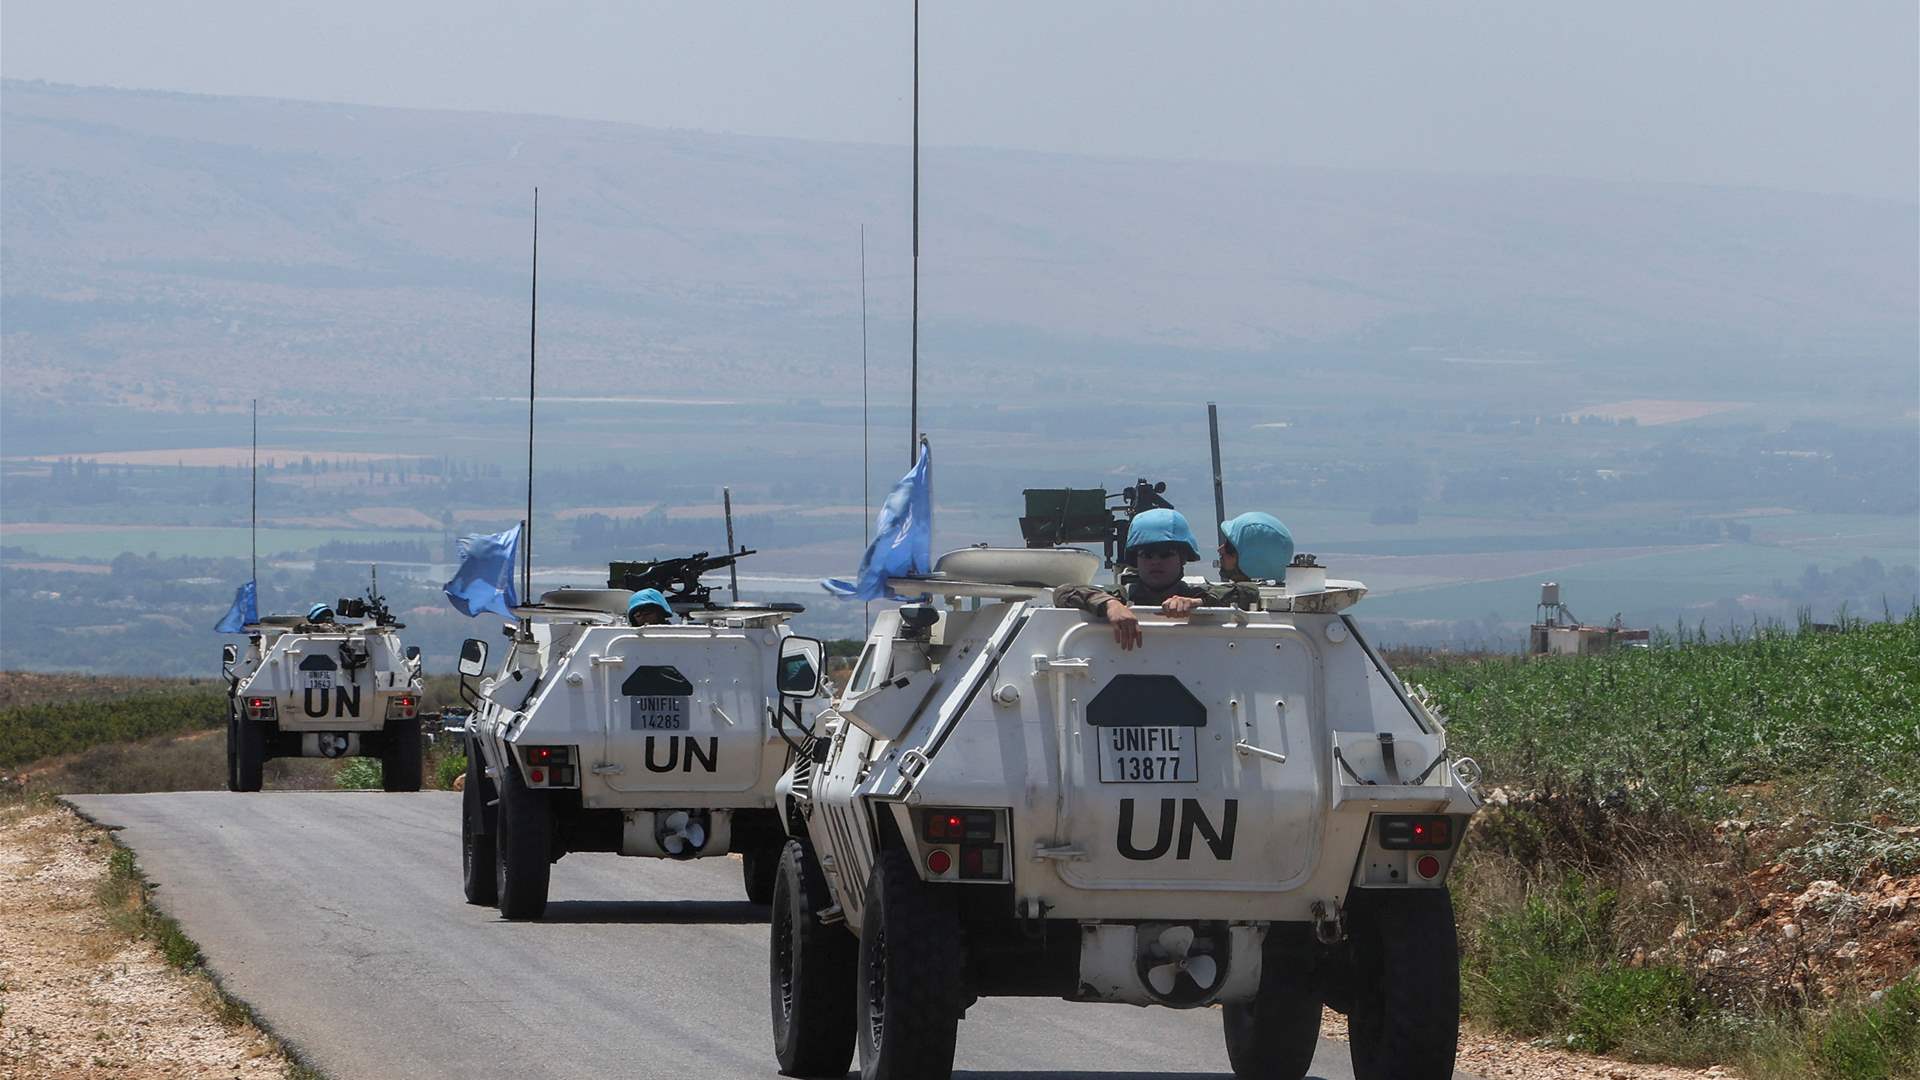 Security issues: UN expected to renew UNIFIL&#39;s mandate amidst complex negotiations